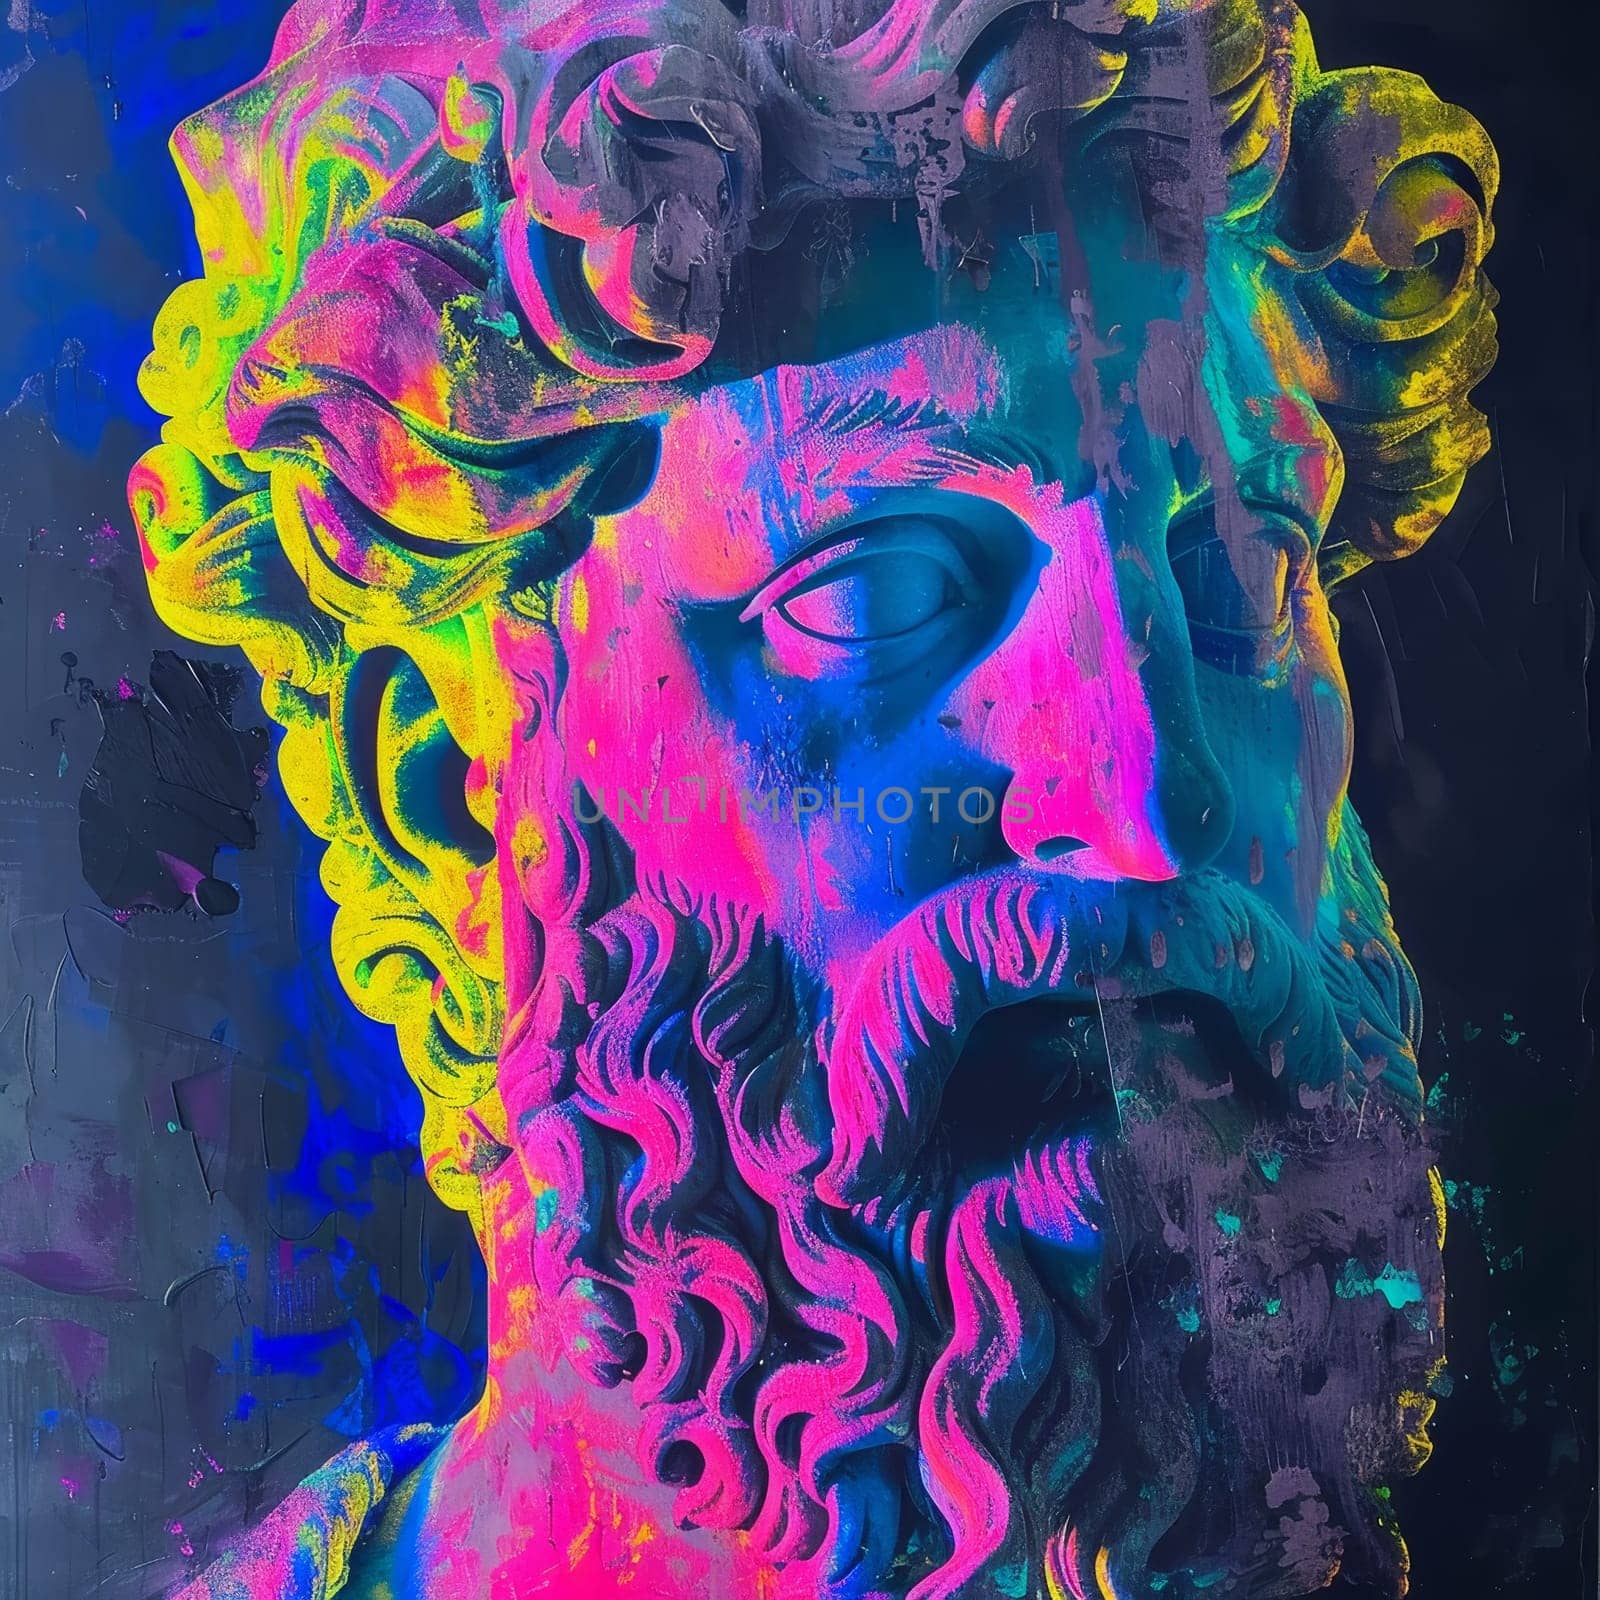 Classical statue illuminated with vibrant neon colors in an artistic display